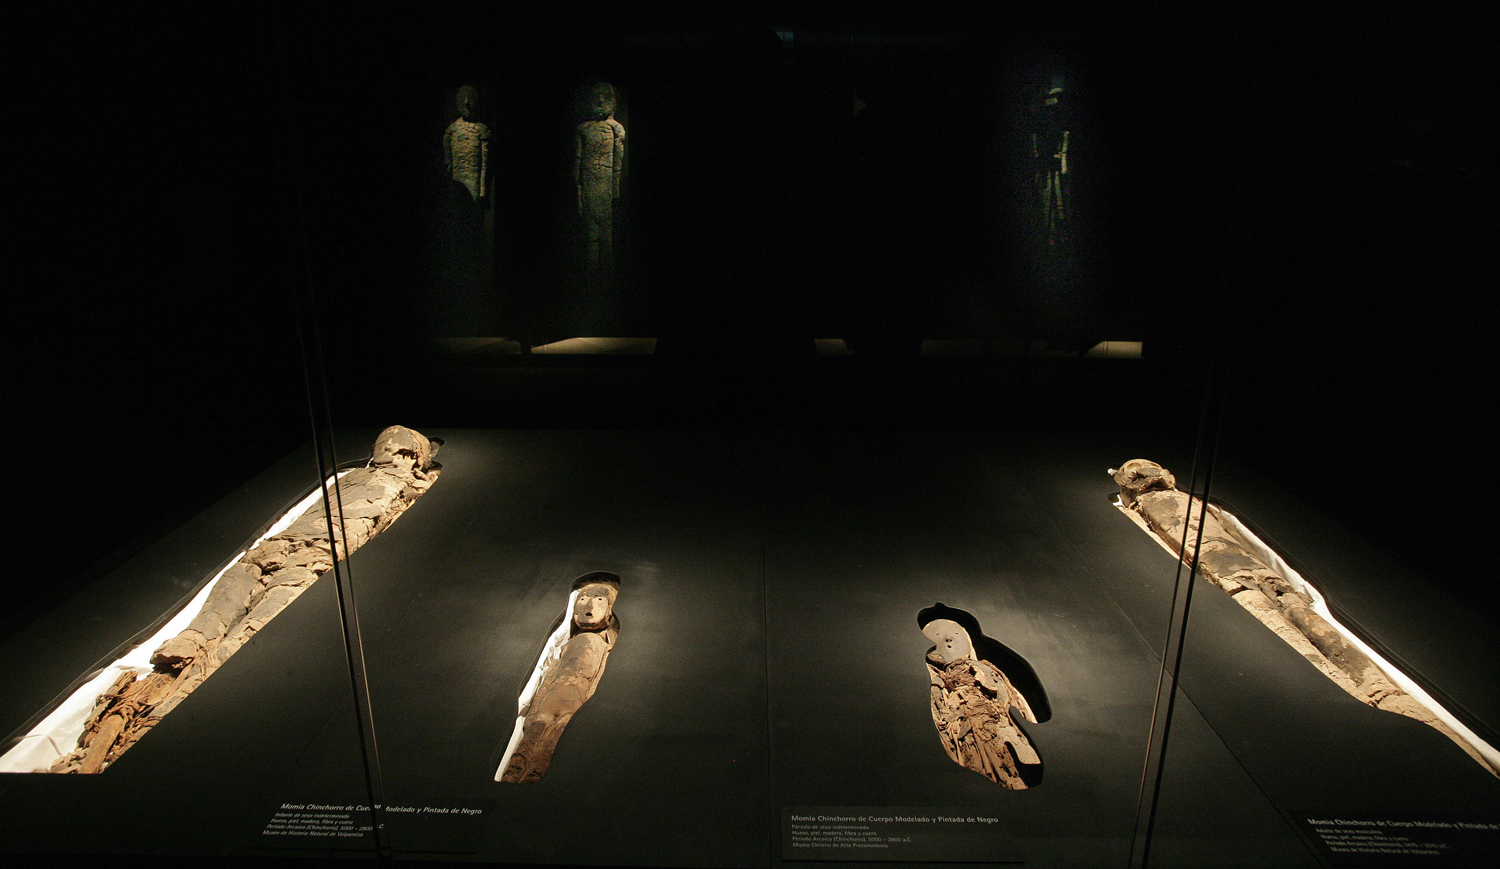 A group of Chinchorro mummies — dated between 5000 B.C. and 3000 B.C. — are on display during the exhibition 